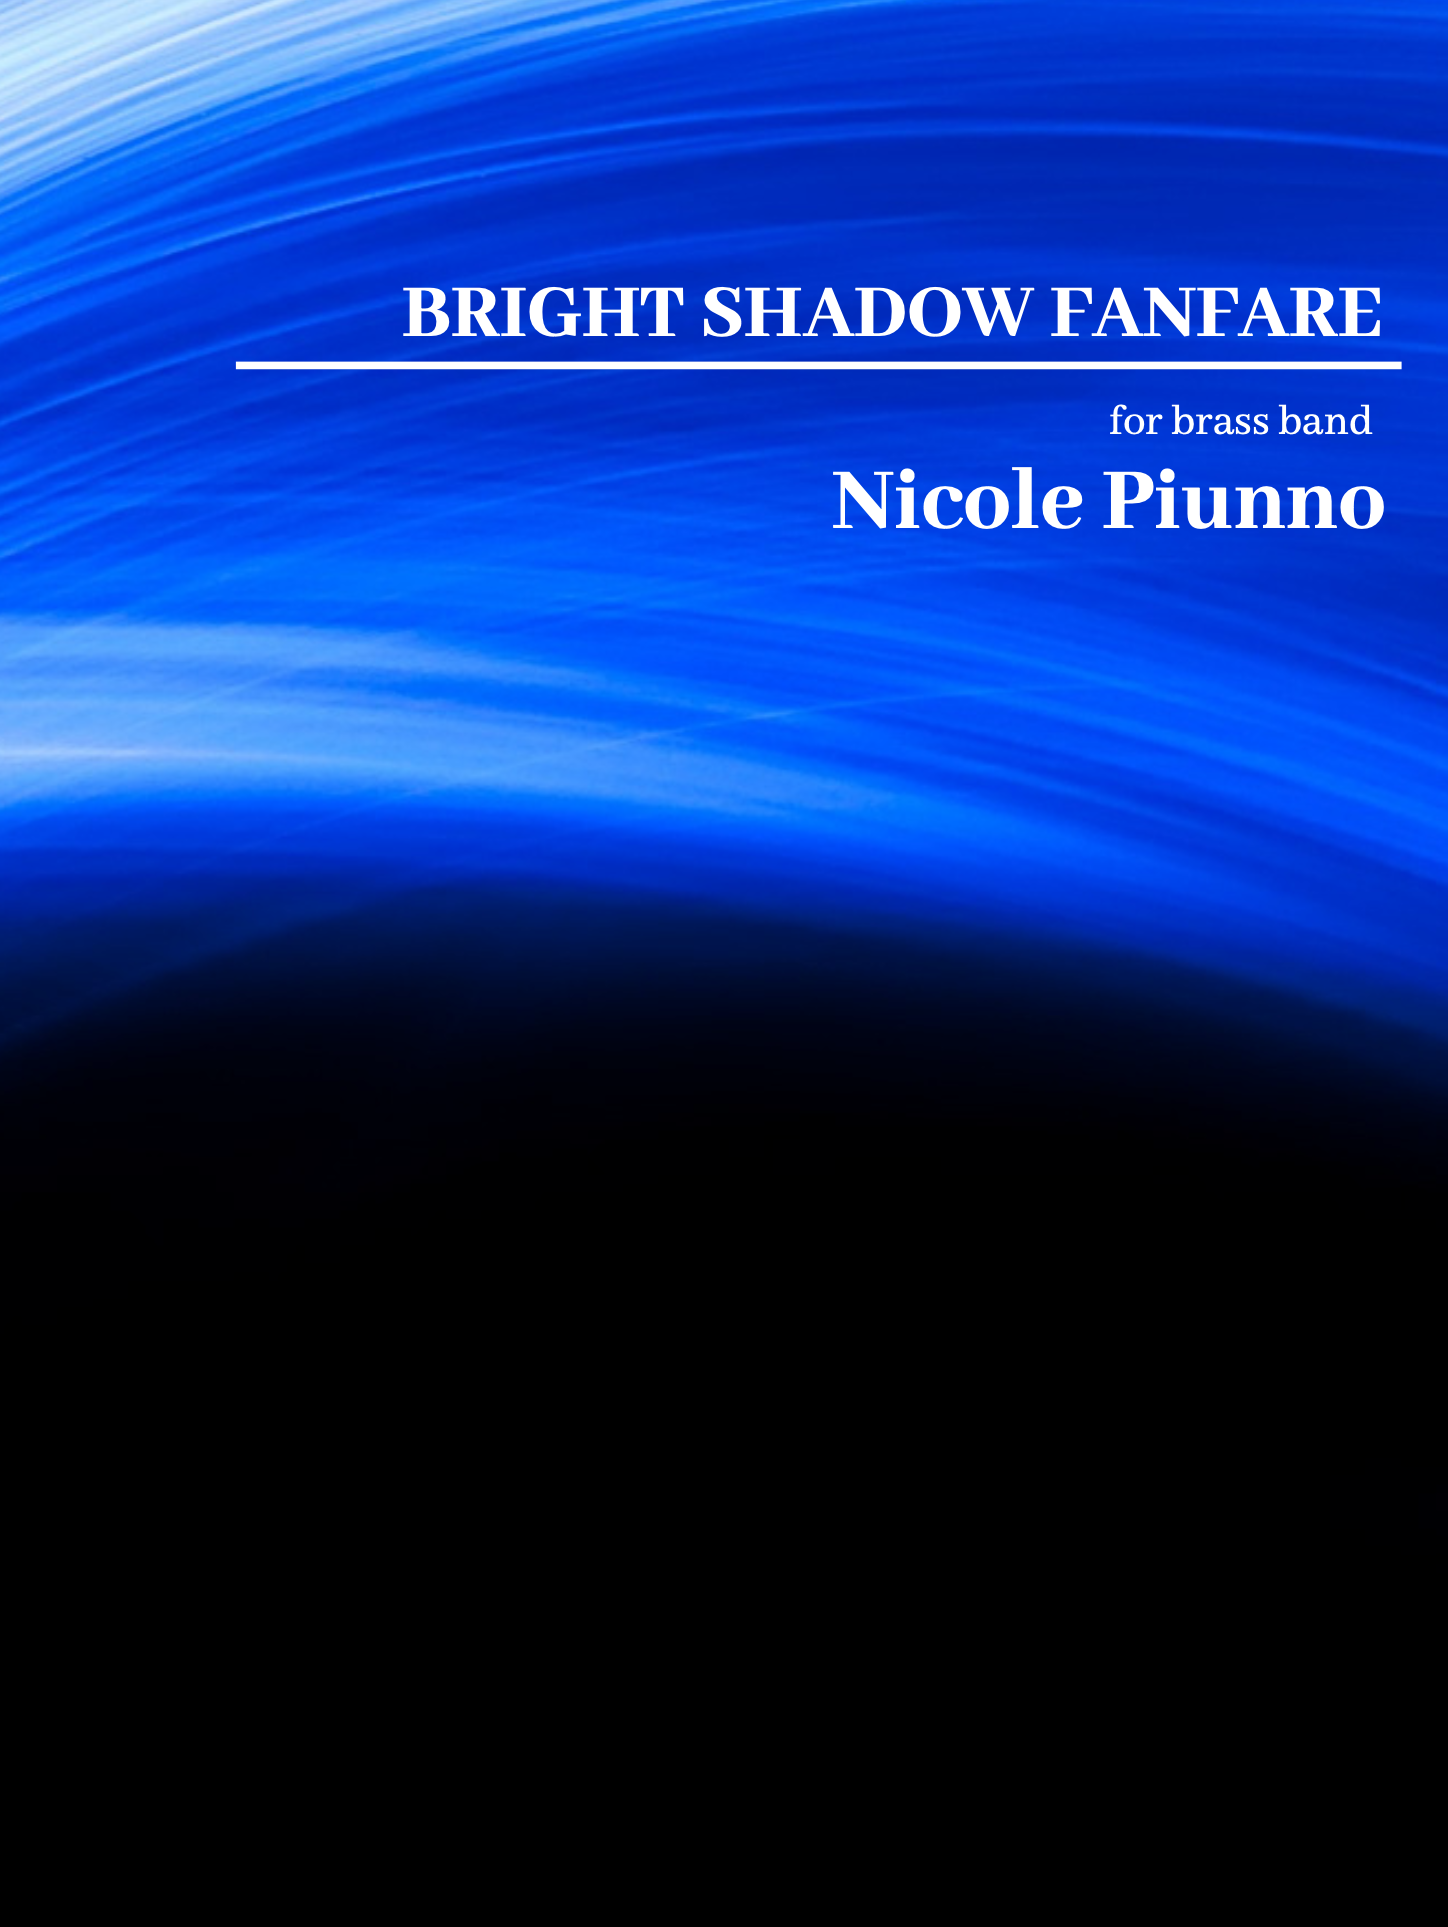 Bright Shadow Fanfare (Score Only) by Nicole Piunno